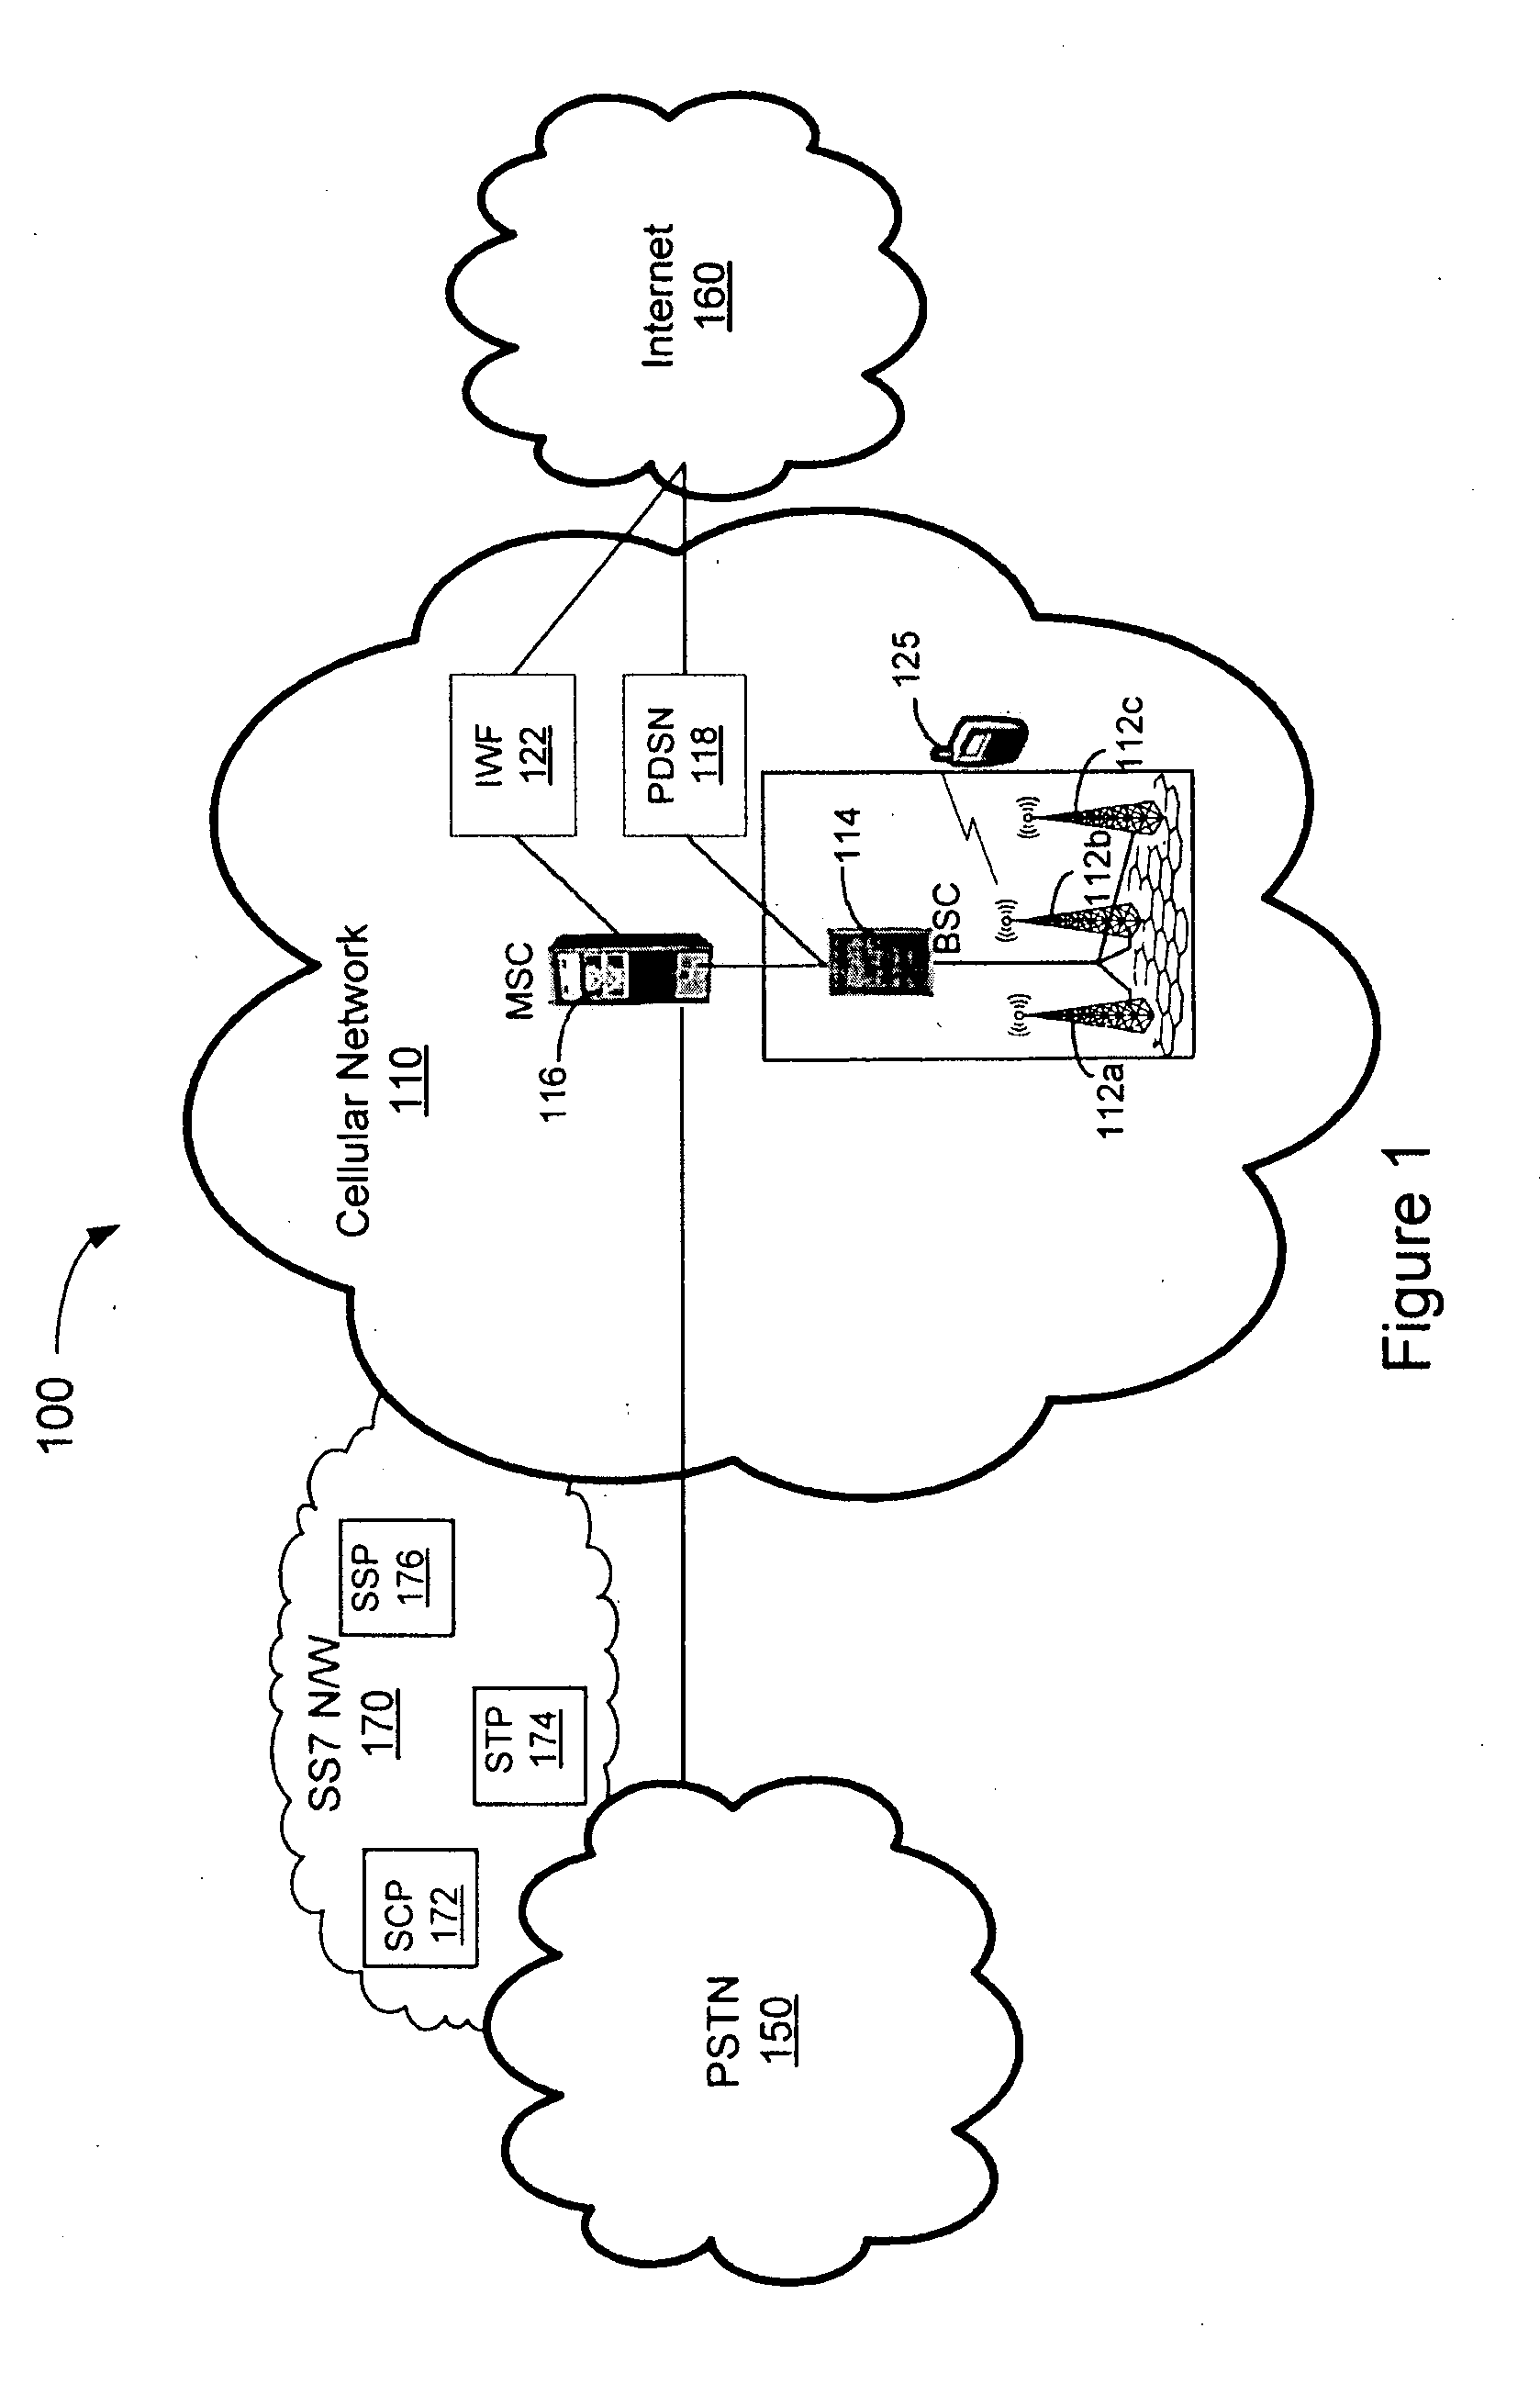 System, method, and computer-readable medium for short message service termination processing by a femtocell system